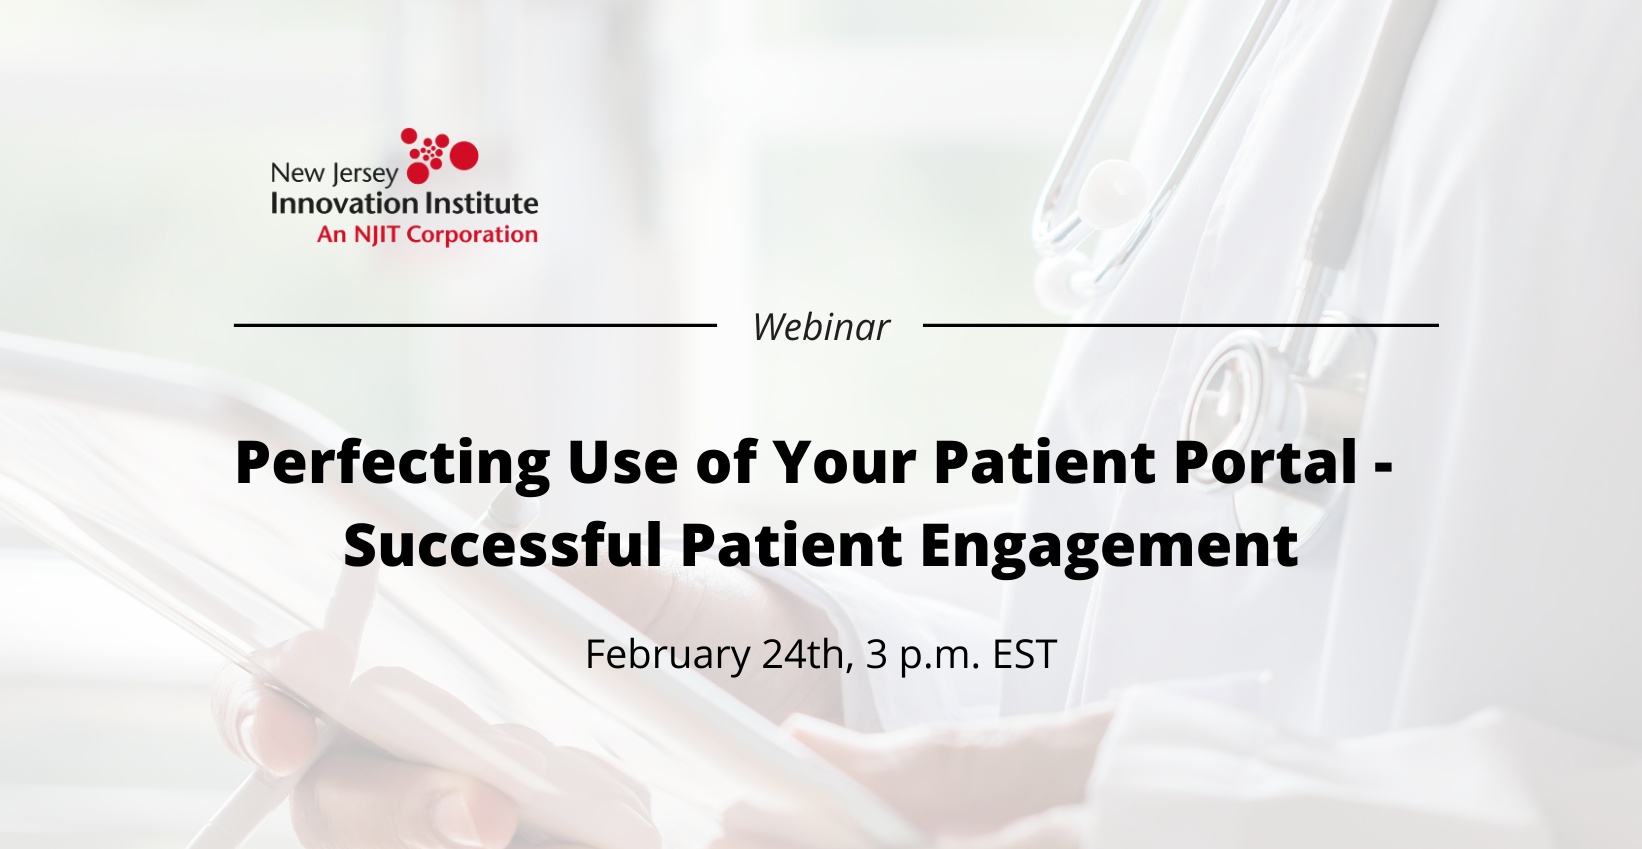 Perfecting Use of Your Patient Portal -Successful Patient Engagement